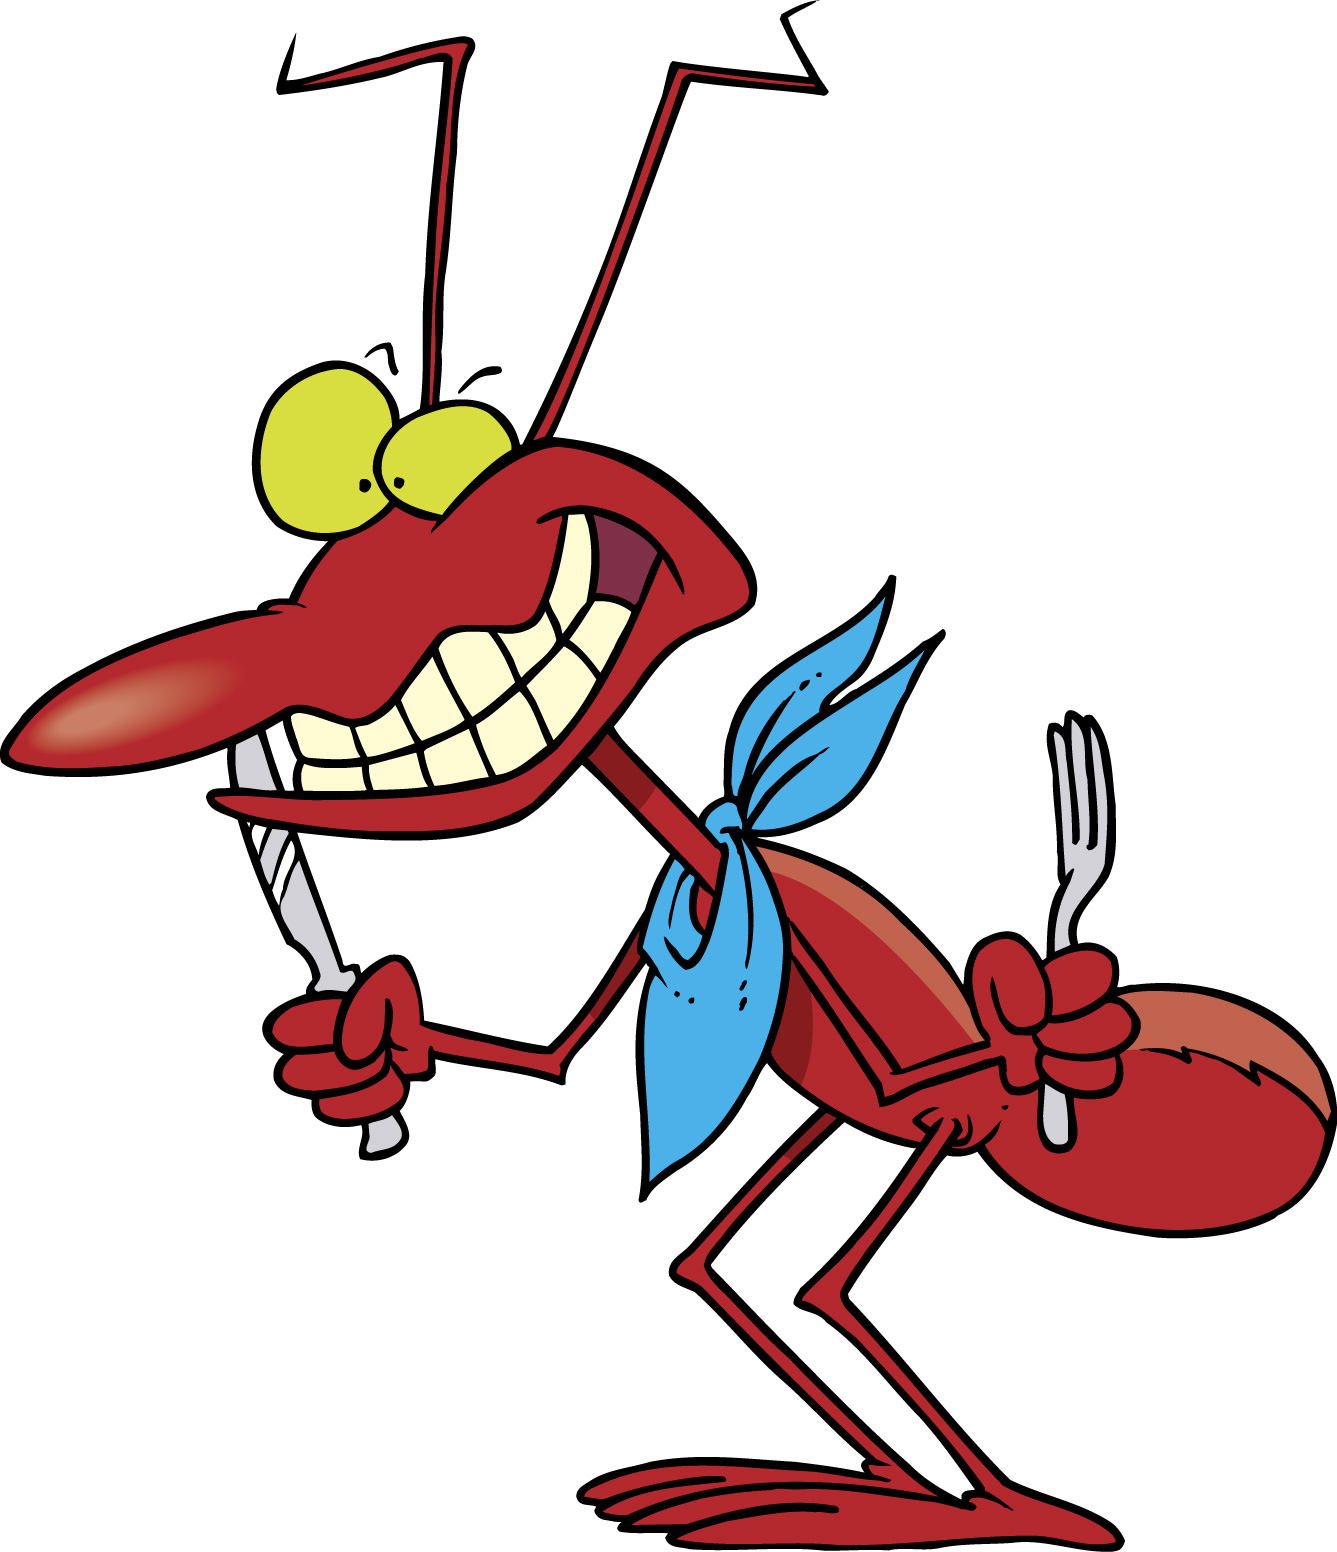 Silly ants clipart